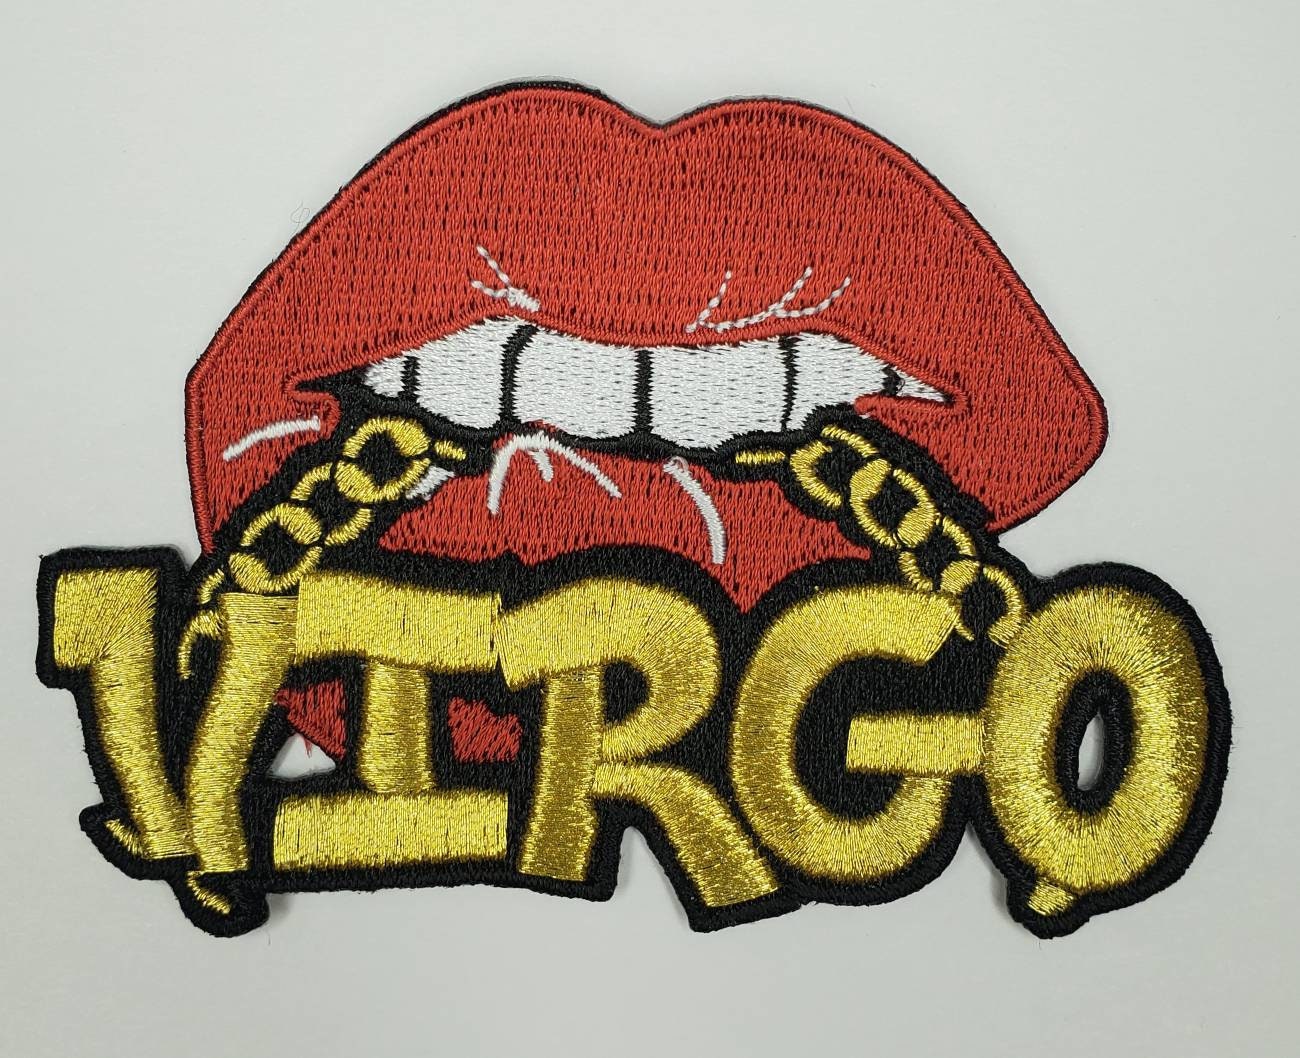 Poppin' Red Lip "Virgo" w/Gold Metallic Chain|Iron-On Patch|Astrology Applique|Cool Embroidered Patch|DIY Patch for Denim & Accessories